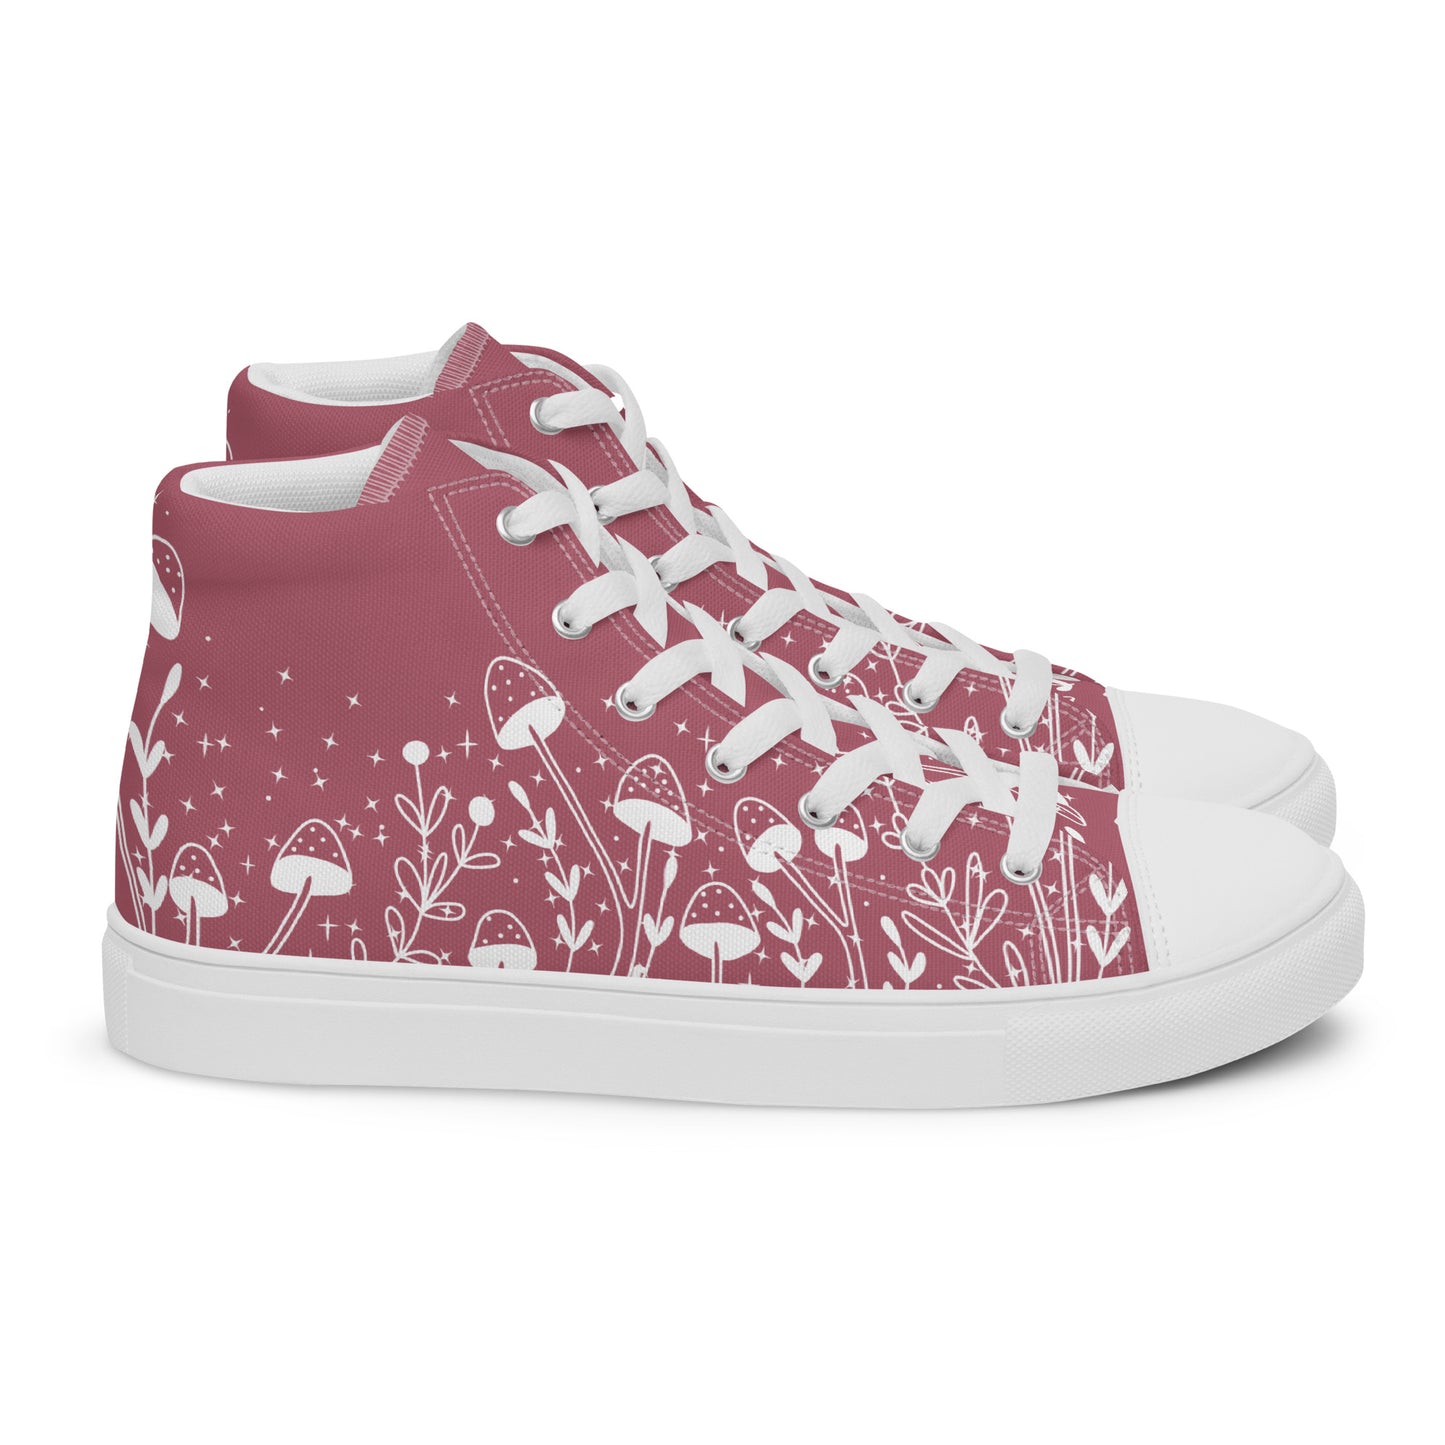 Fungi Star Petal Pink Women’s High Top Canvas Shoes